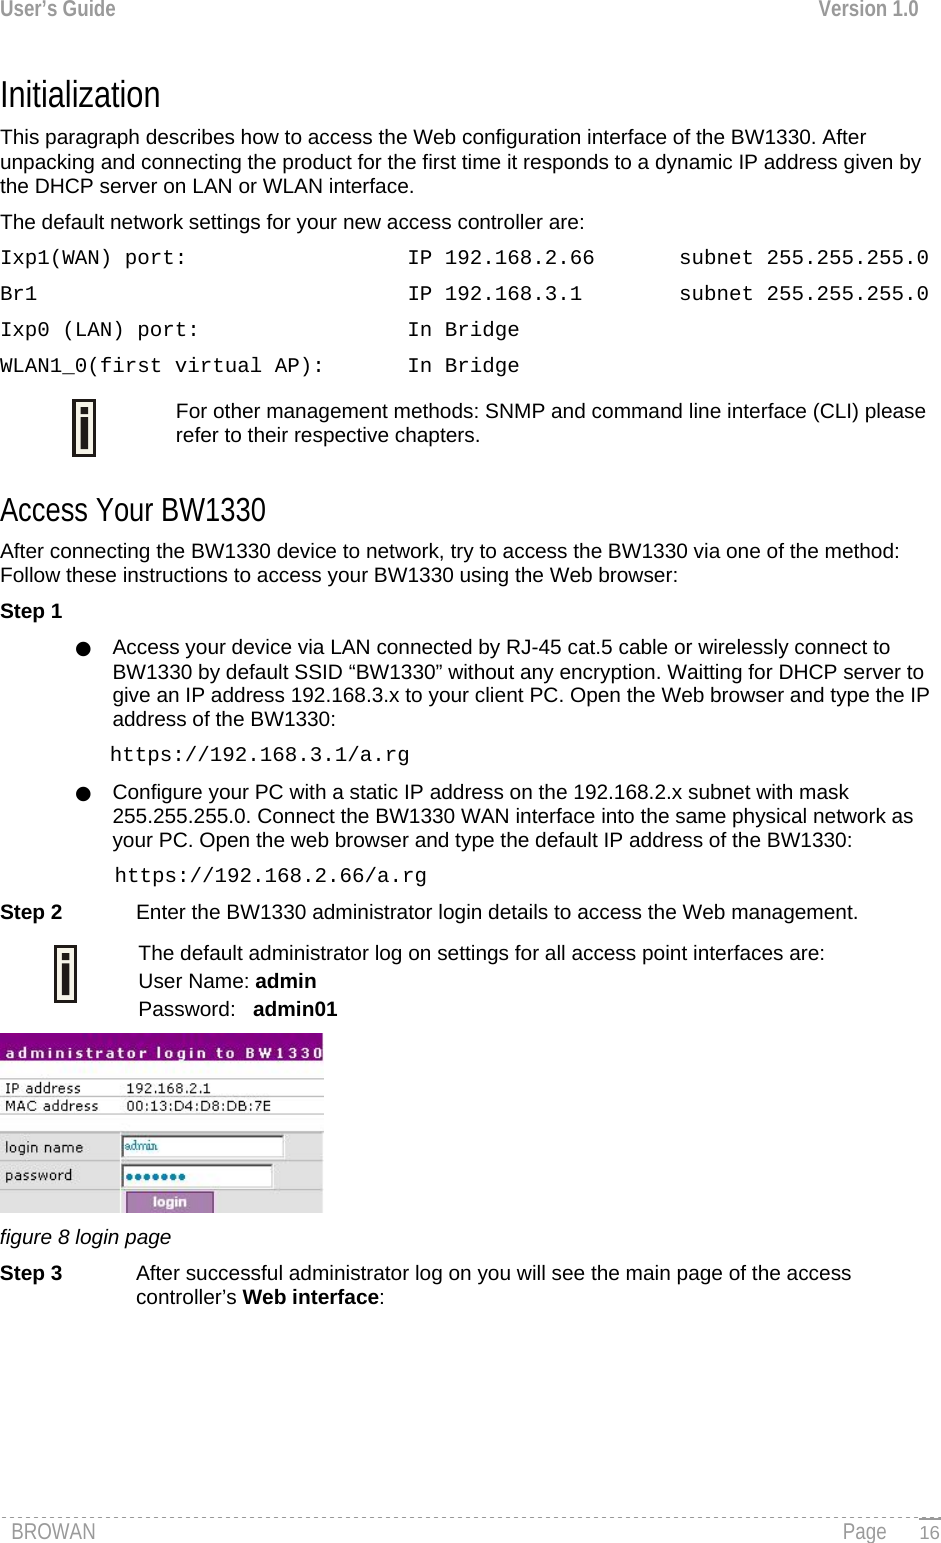 User’s Guide  Version 1.0  Initialization  This paragraph describes how to access the Web configuration interface of the BW1330. After unpacking and connecting the product for the first time it responds to a dynamic IP address given by the DHCP server on LAN or WLAN interface. The default network settings for your new access controller are: Ixp1(WAN) port:    IP 192.168.2.66  subnet 255.255.255.0 Br1      IP 192.168.3.1  subnet 255.255.255.0 Ixp0 (LAN) port:    In Bridge WLAN1_0(first virtual AP):  In Bridge For other management methods: SNMP and command line interface (CLI) please refer to their respective chapters.  Access Your BW1330 After connecting the BW1330 device to network, try to access the BW1330 via one of the method: Follow these instructions to access your BW1330 using the Web browser: Step 1 ●  Access your device via LAN connected by RJ-45 cat.5 cable or wirelessly connect to BW1330 by default SSID “BW1330” without any encryption. Waitting for DHCP server to give an IP address 192.168.3.x to your client PC. Open the Web browser and type the IP address of the BW1330:  https://192.168.3.1/a.rg ●  Configure your PC with a static IP address on the 192.168.2.x subnet with mask 255.255.255.0. Connect the BW1330 WAN interface into the same physical network as your PC. Open the web browser and type the default IP address of the BW1330: https://192.168.2.66/a.rg Step 2  Enter the BW1330 administrator login details to access the Web management. The default administrator log on settings for all access point interfaces are:  User Name: admin Password:   admin01  figure 8 login page Step 3  After successful administrator log on you will see the main page of the access controller’s Web interface: BROWAN                                                                                                                                               Page   16